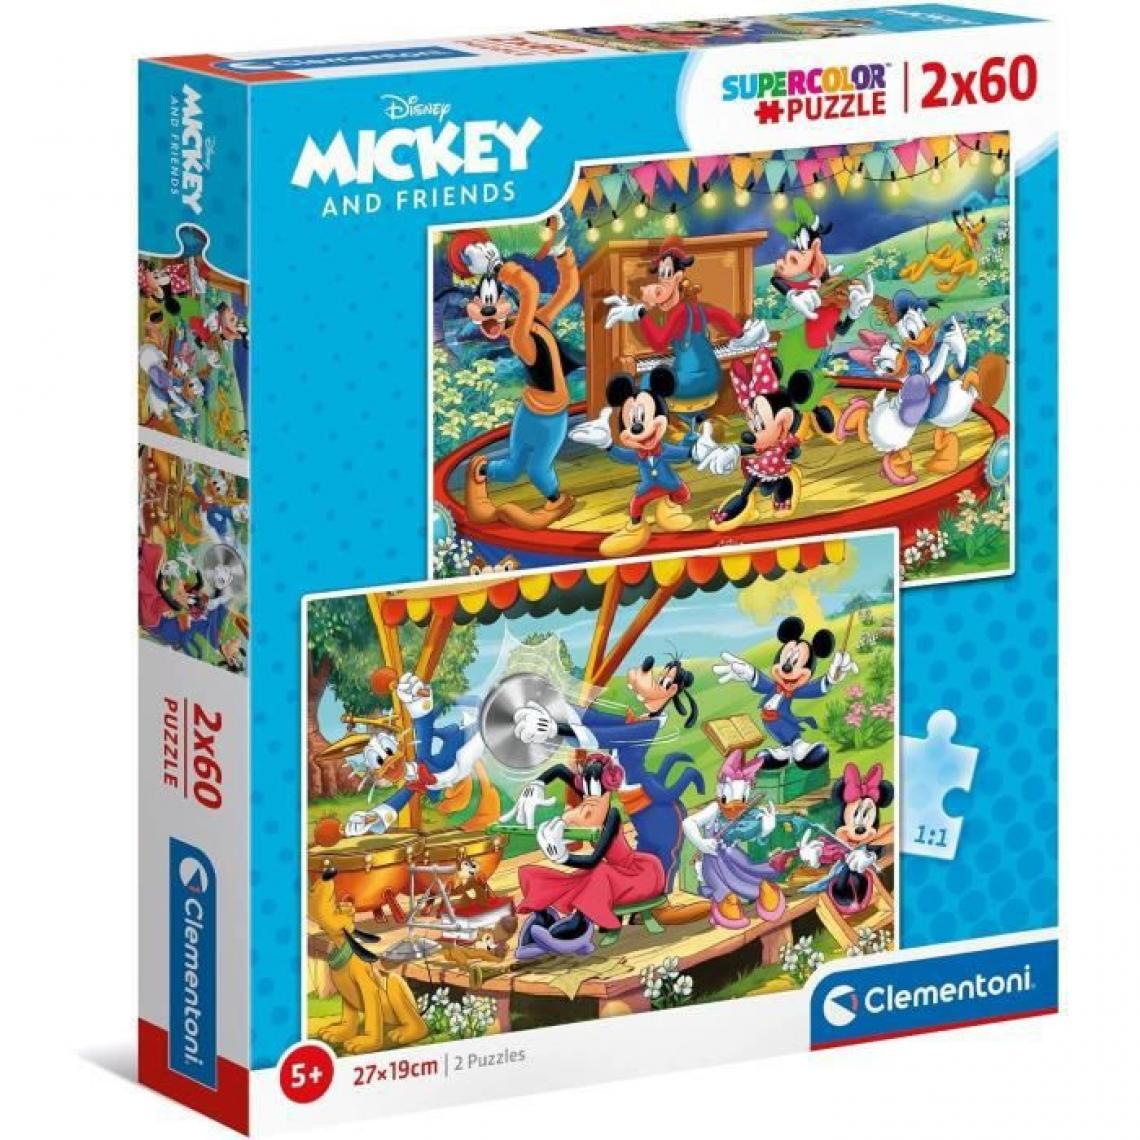 Clementoni - CLEMENTONI - 21620 - 2x60 pieces - Mickey and friends - Animaux